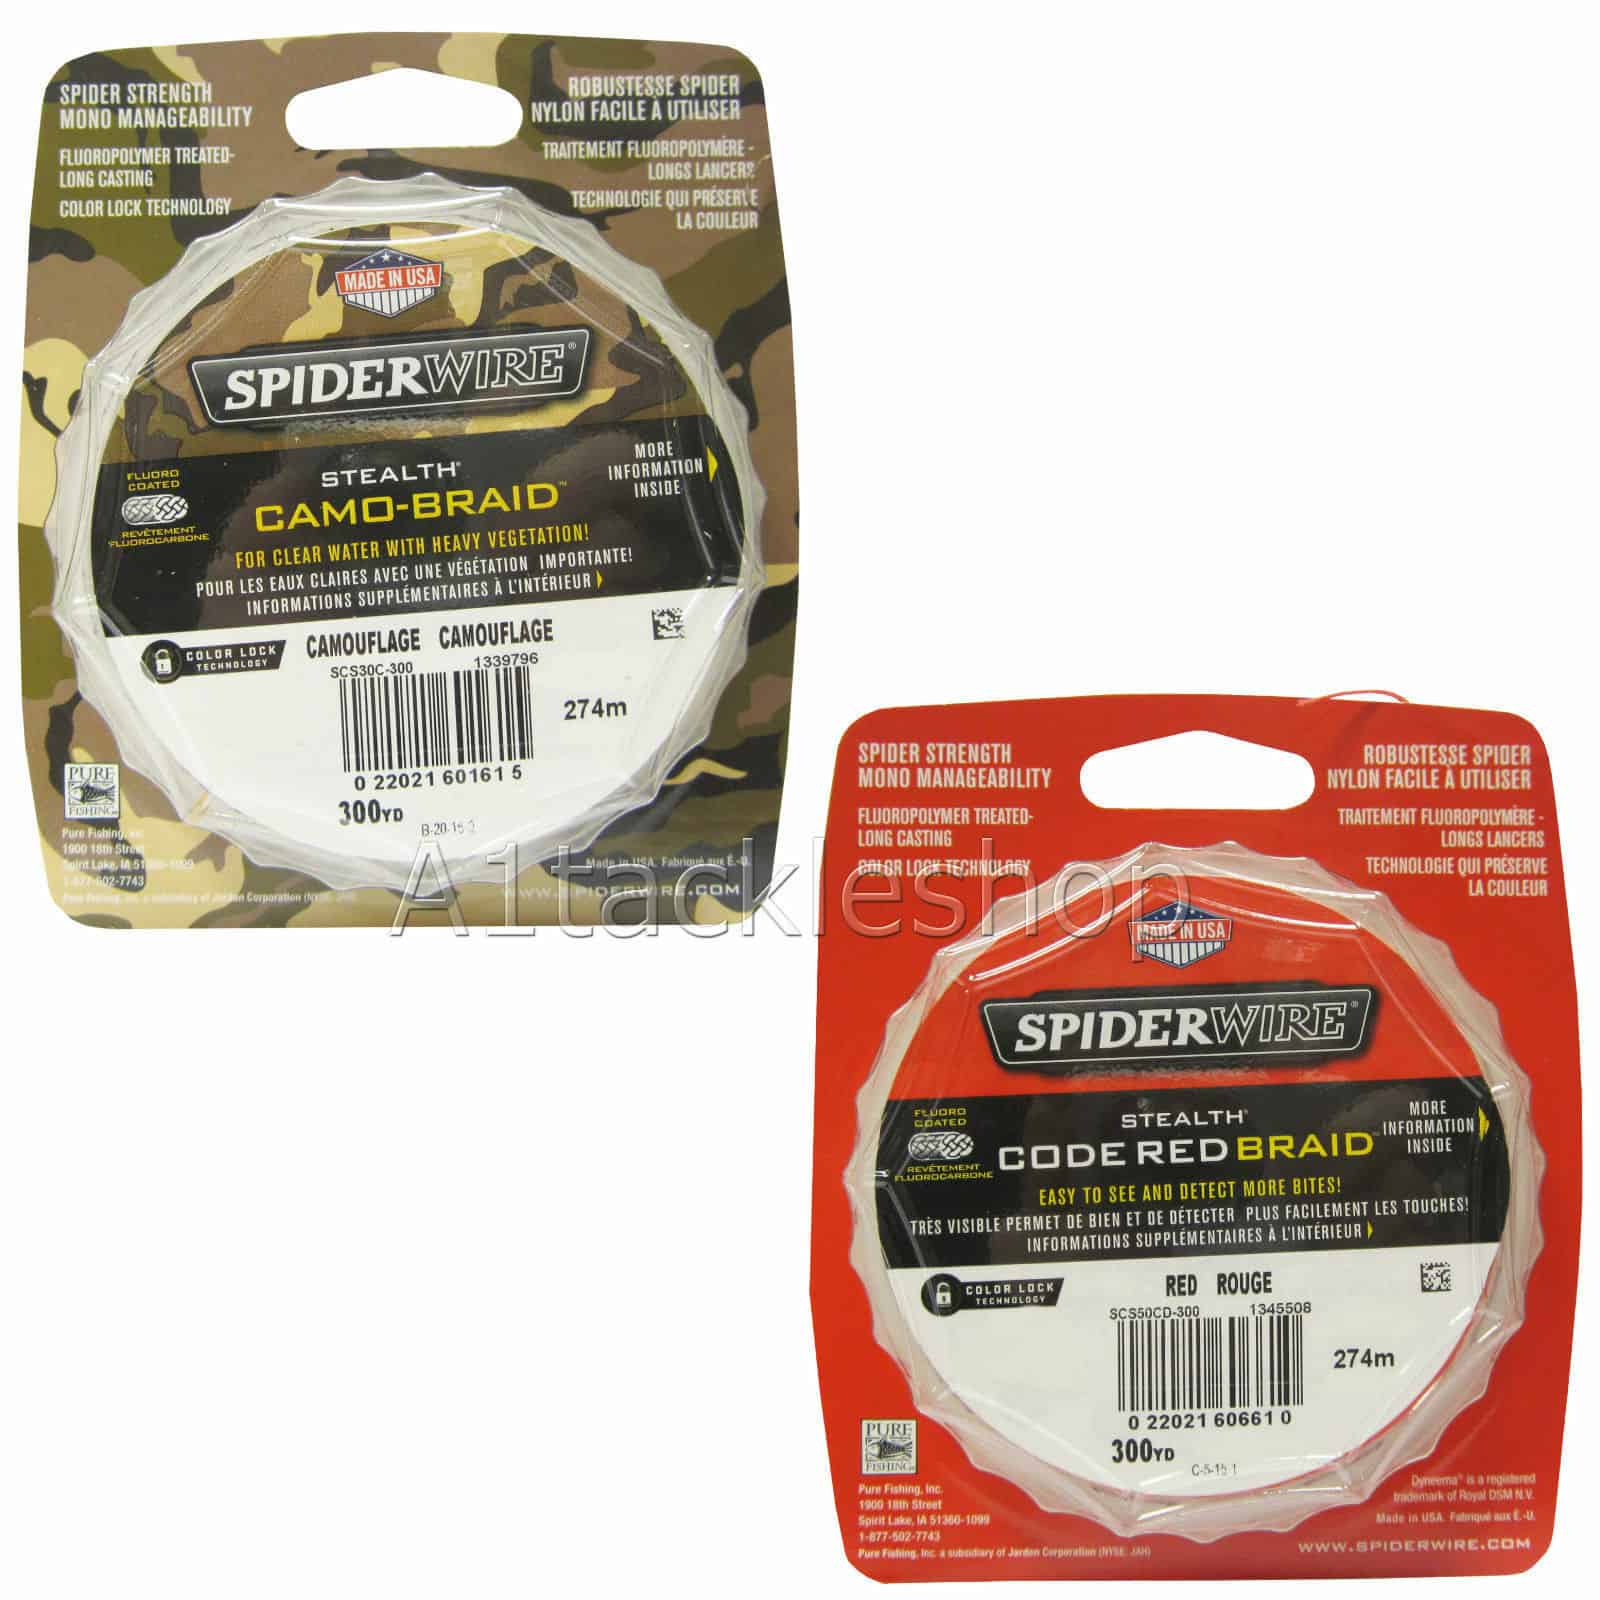 https://www.c2kft.co.uk/wp-content/uploads/imported/5/Spiderwire-Stealth-CamoMoss-Green-Fishing-Braid-300YDS-All-Breaking-Strains-184110765445.JPG